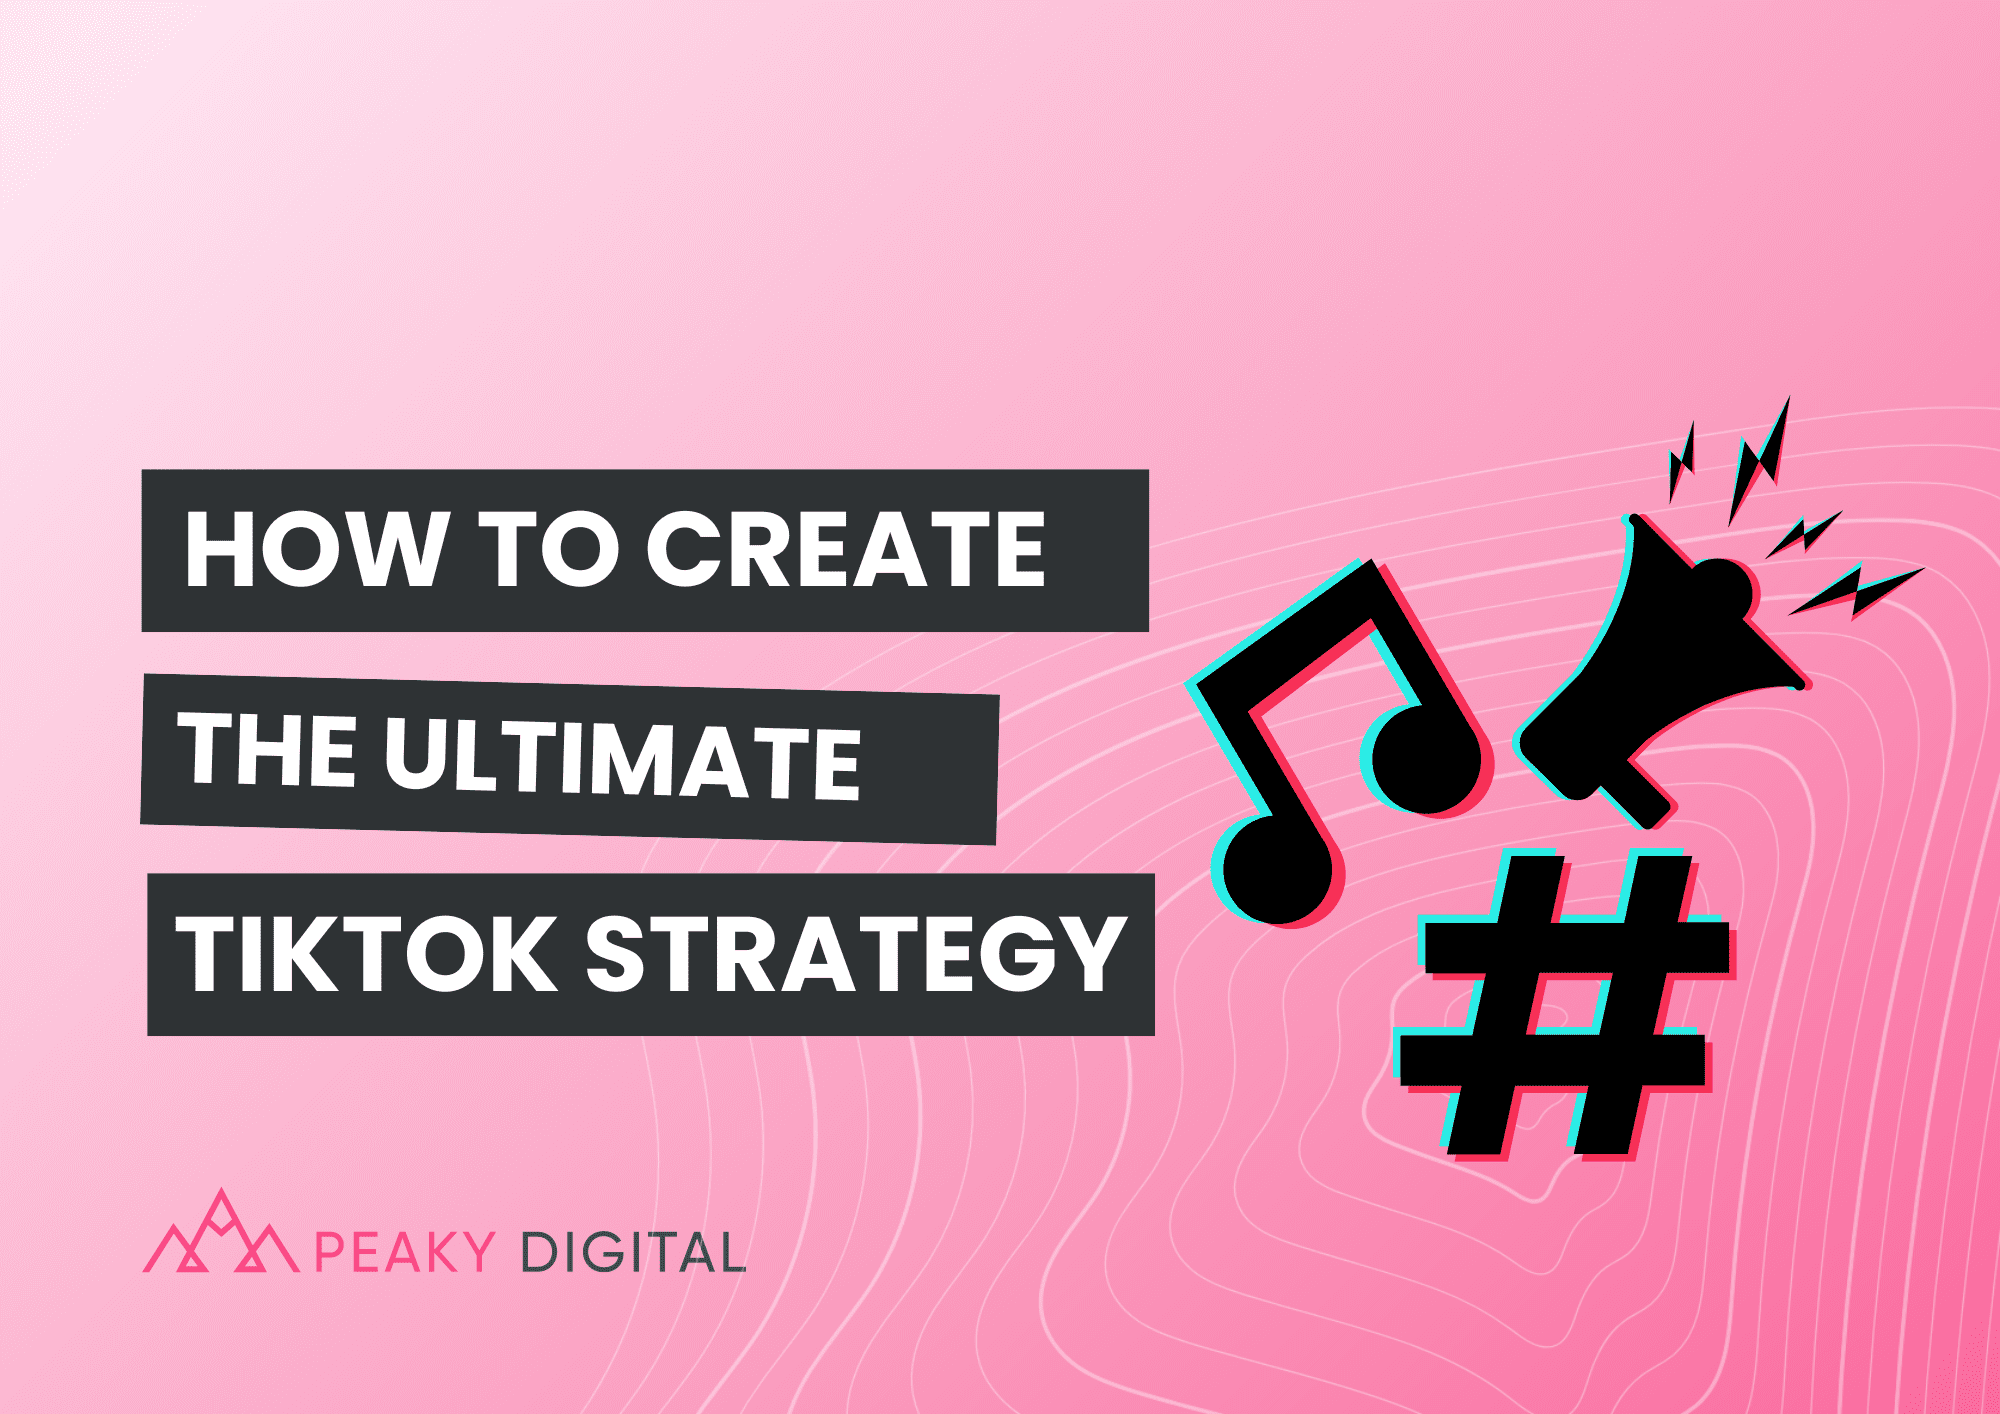 How to Create the Ultimate Tiktok Strategy